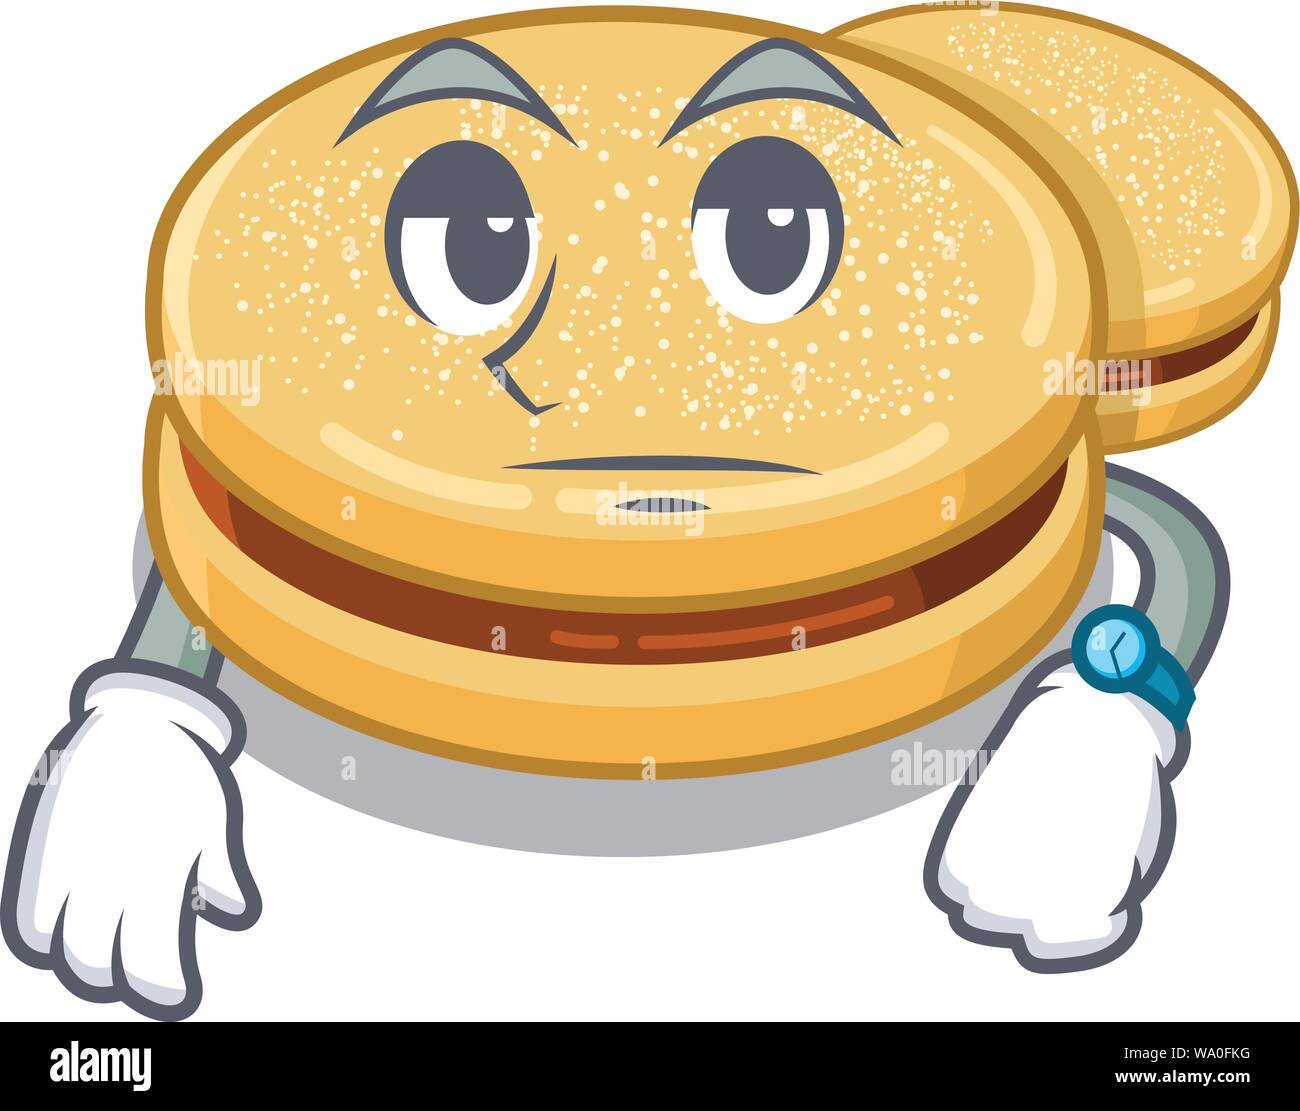 Waiting alfajores isolated with in the mascot Stock Vector